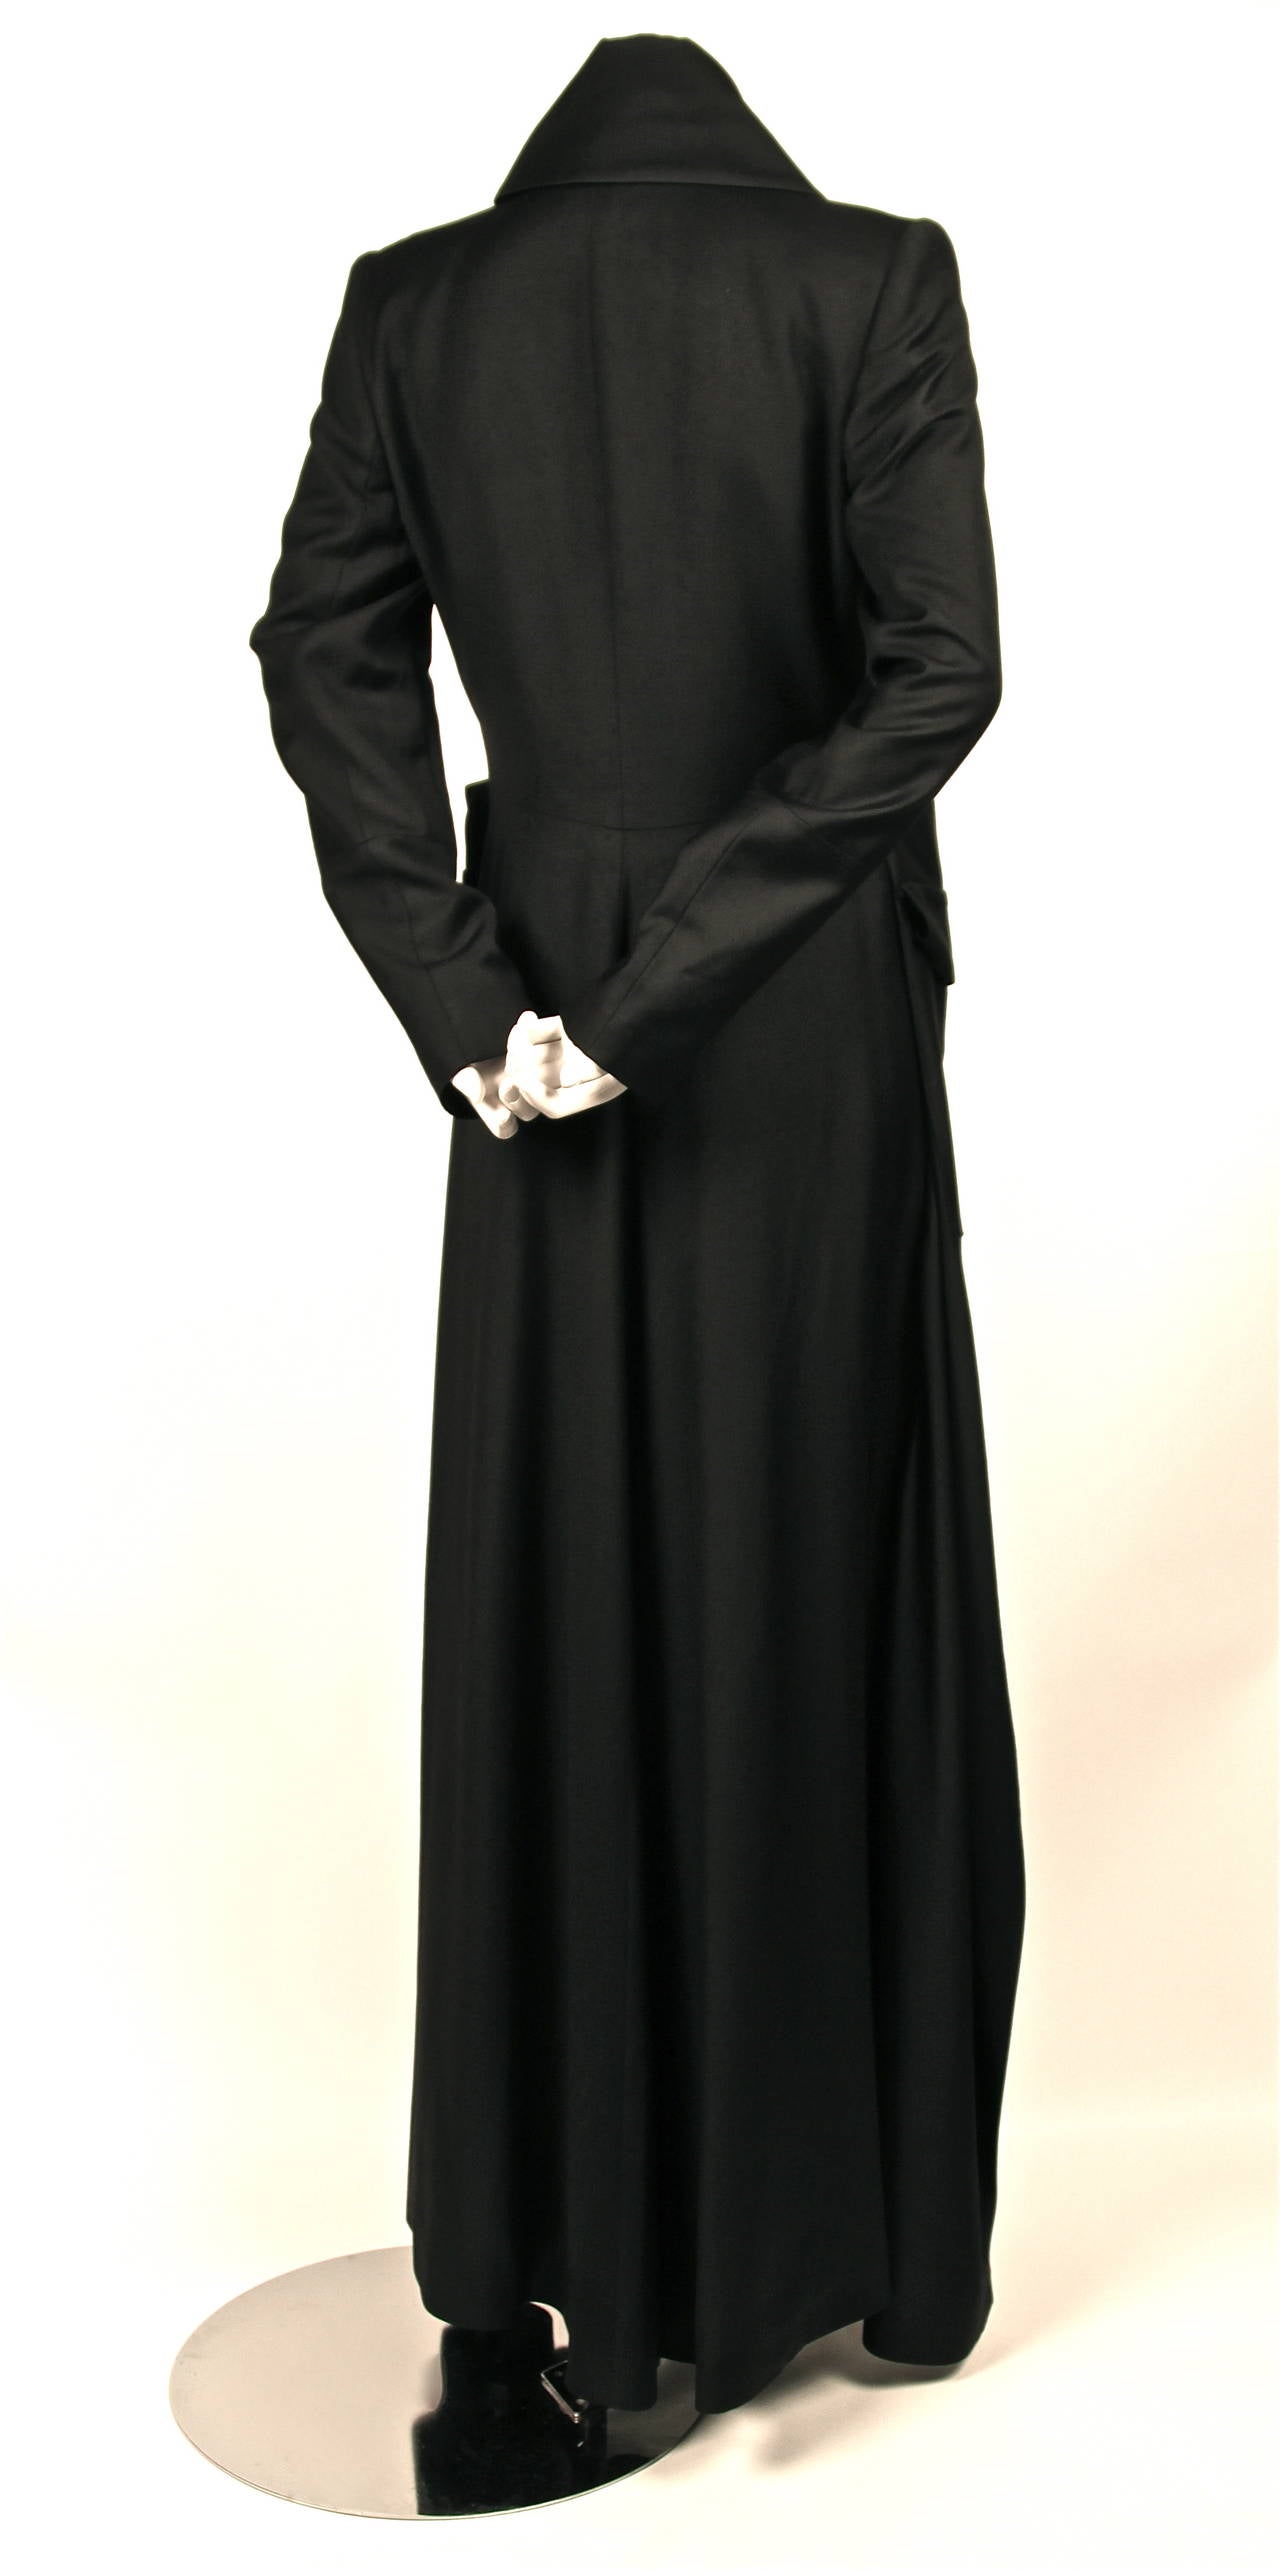 rare 1990's ALEXANDER MCQUEEN black floor length evening coat with draped sides 3